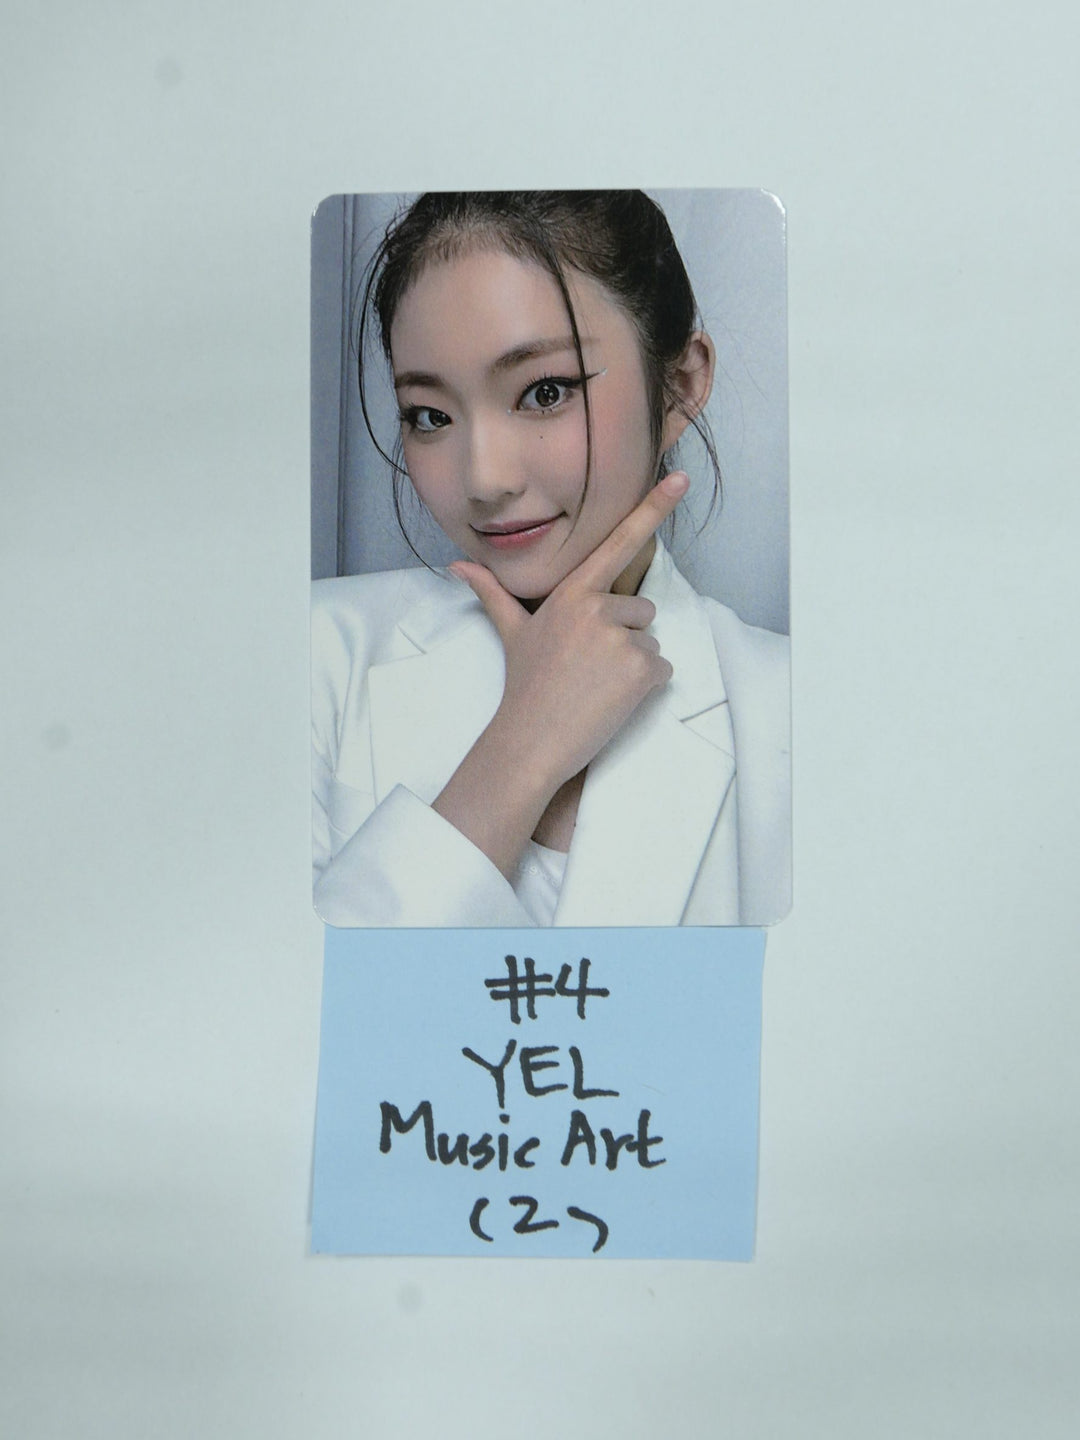 H1-KEY 'ATHLETIC GIRL' - Musicart Fansign Event Photocard